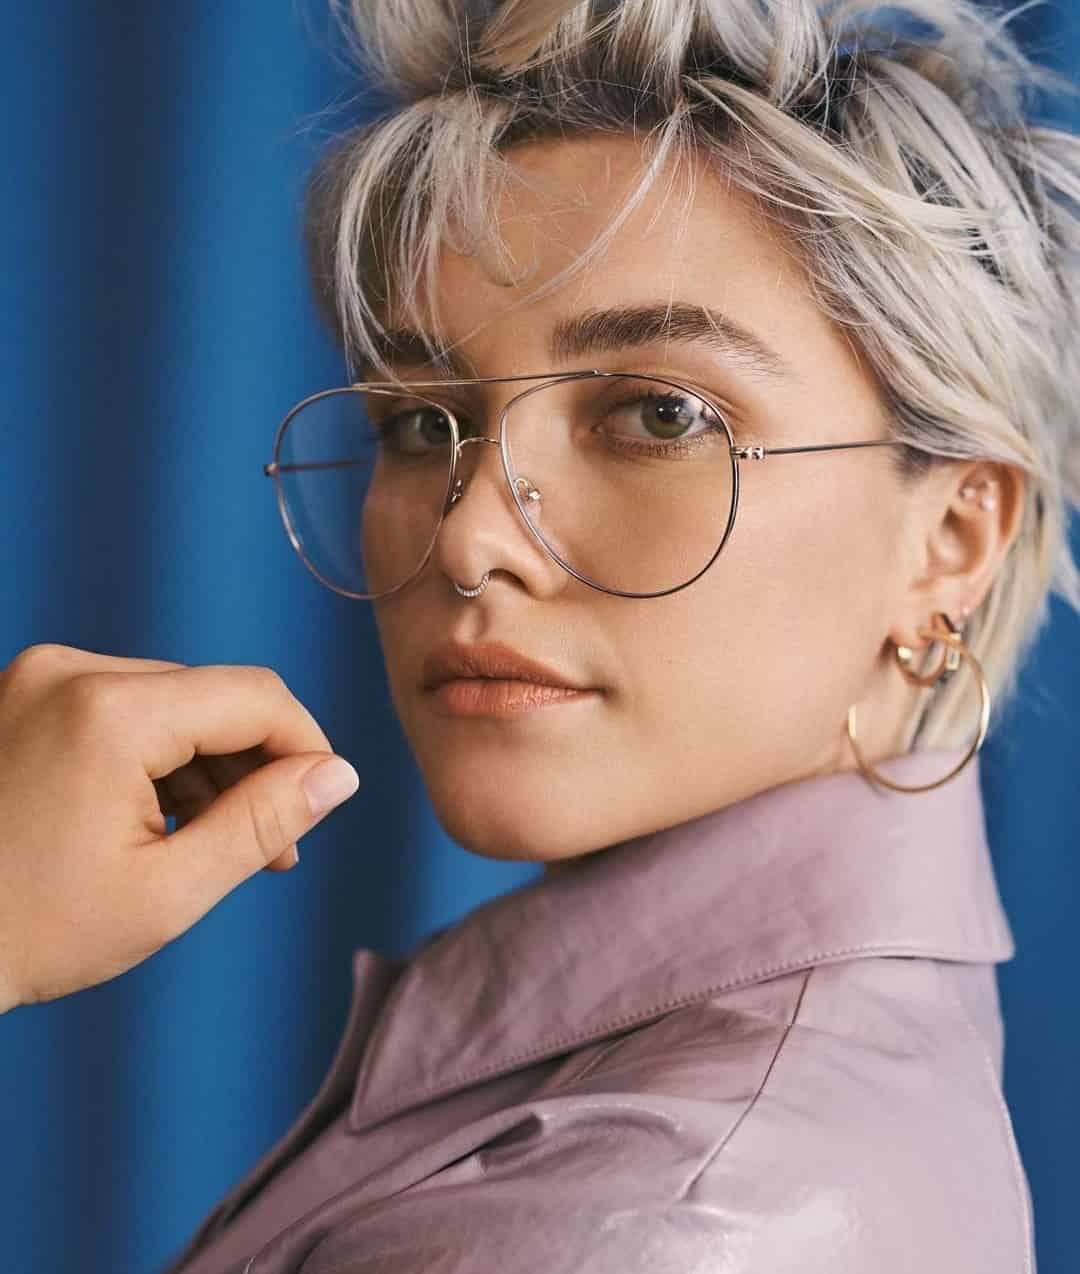 Florence Pugh Net Worth, Age, Family, Boyfriend, Biography, and More